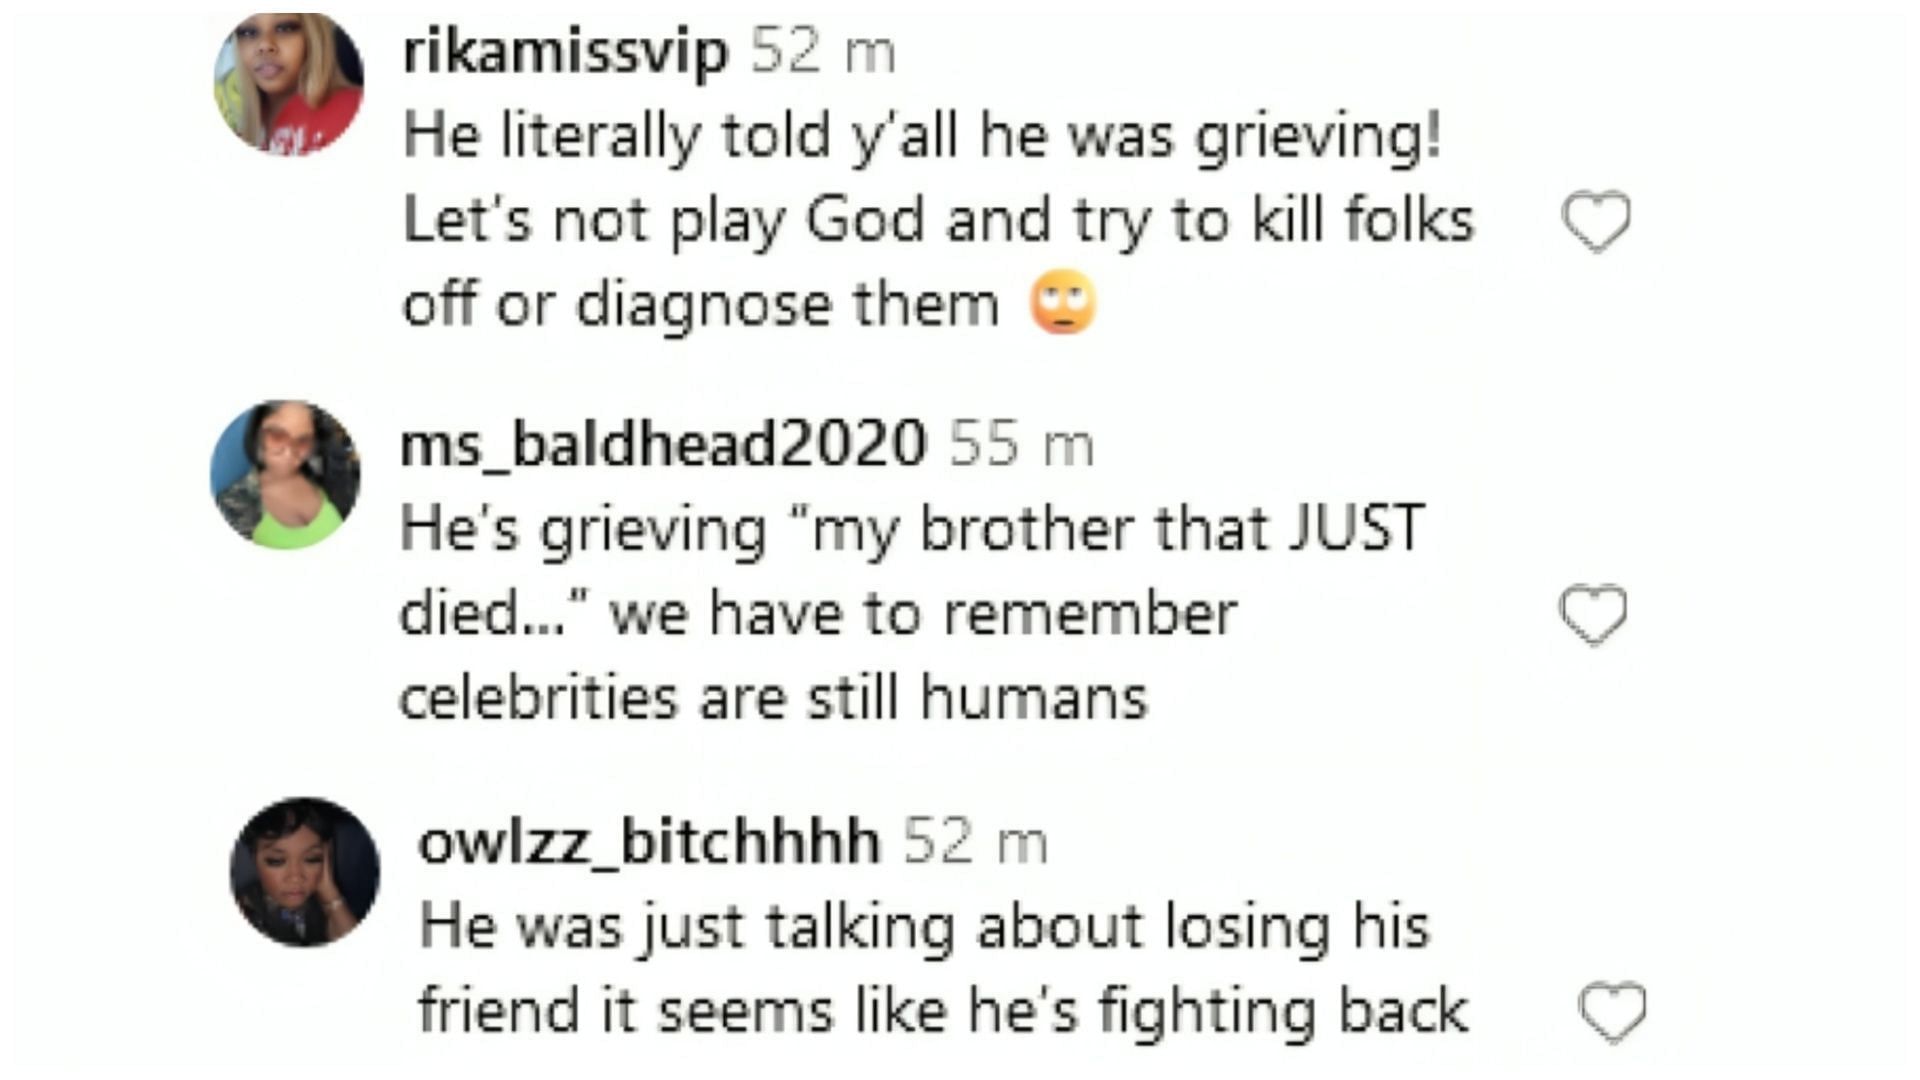 Fans expressed concern for Lawrence (Image via Instagram/@rikamissvip/@ms_baldhead2020/@owlzz_bitchhhh)